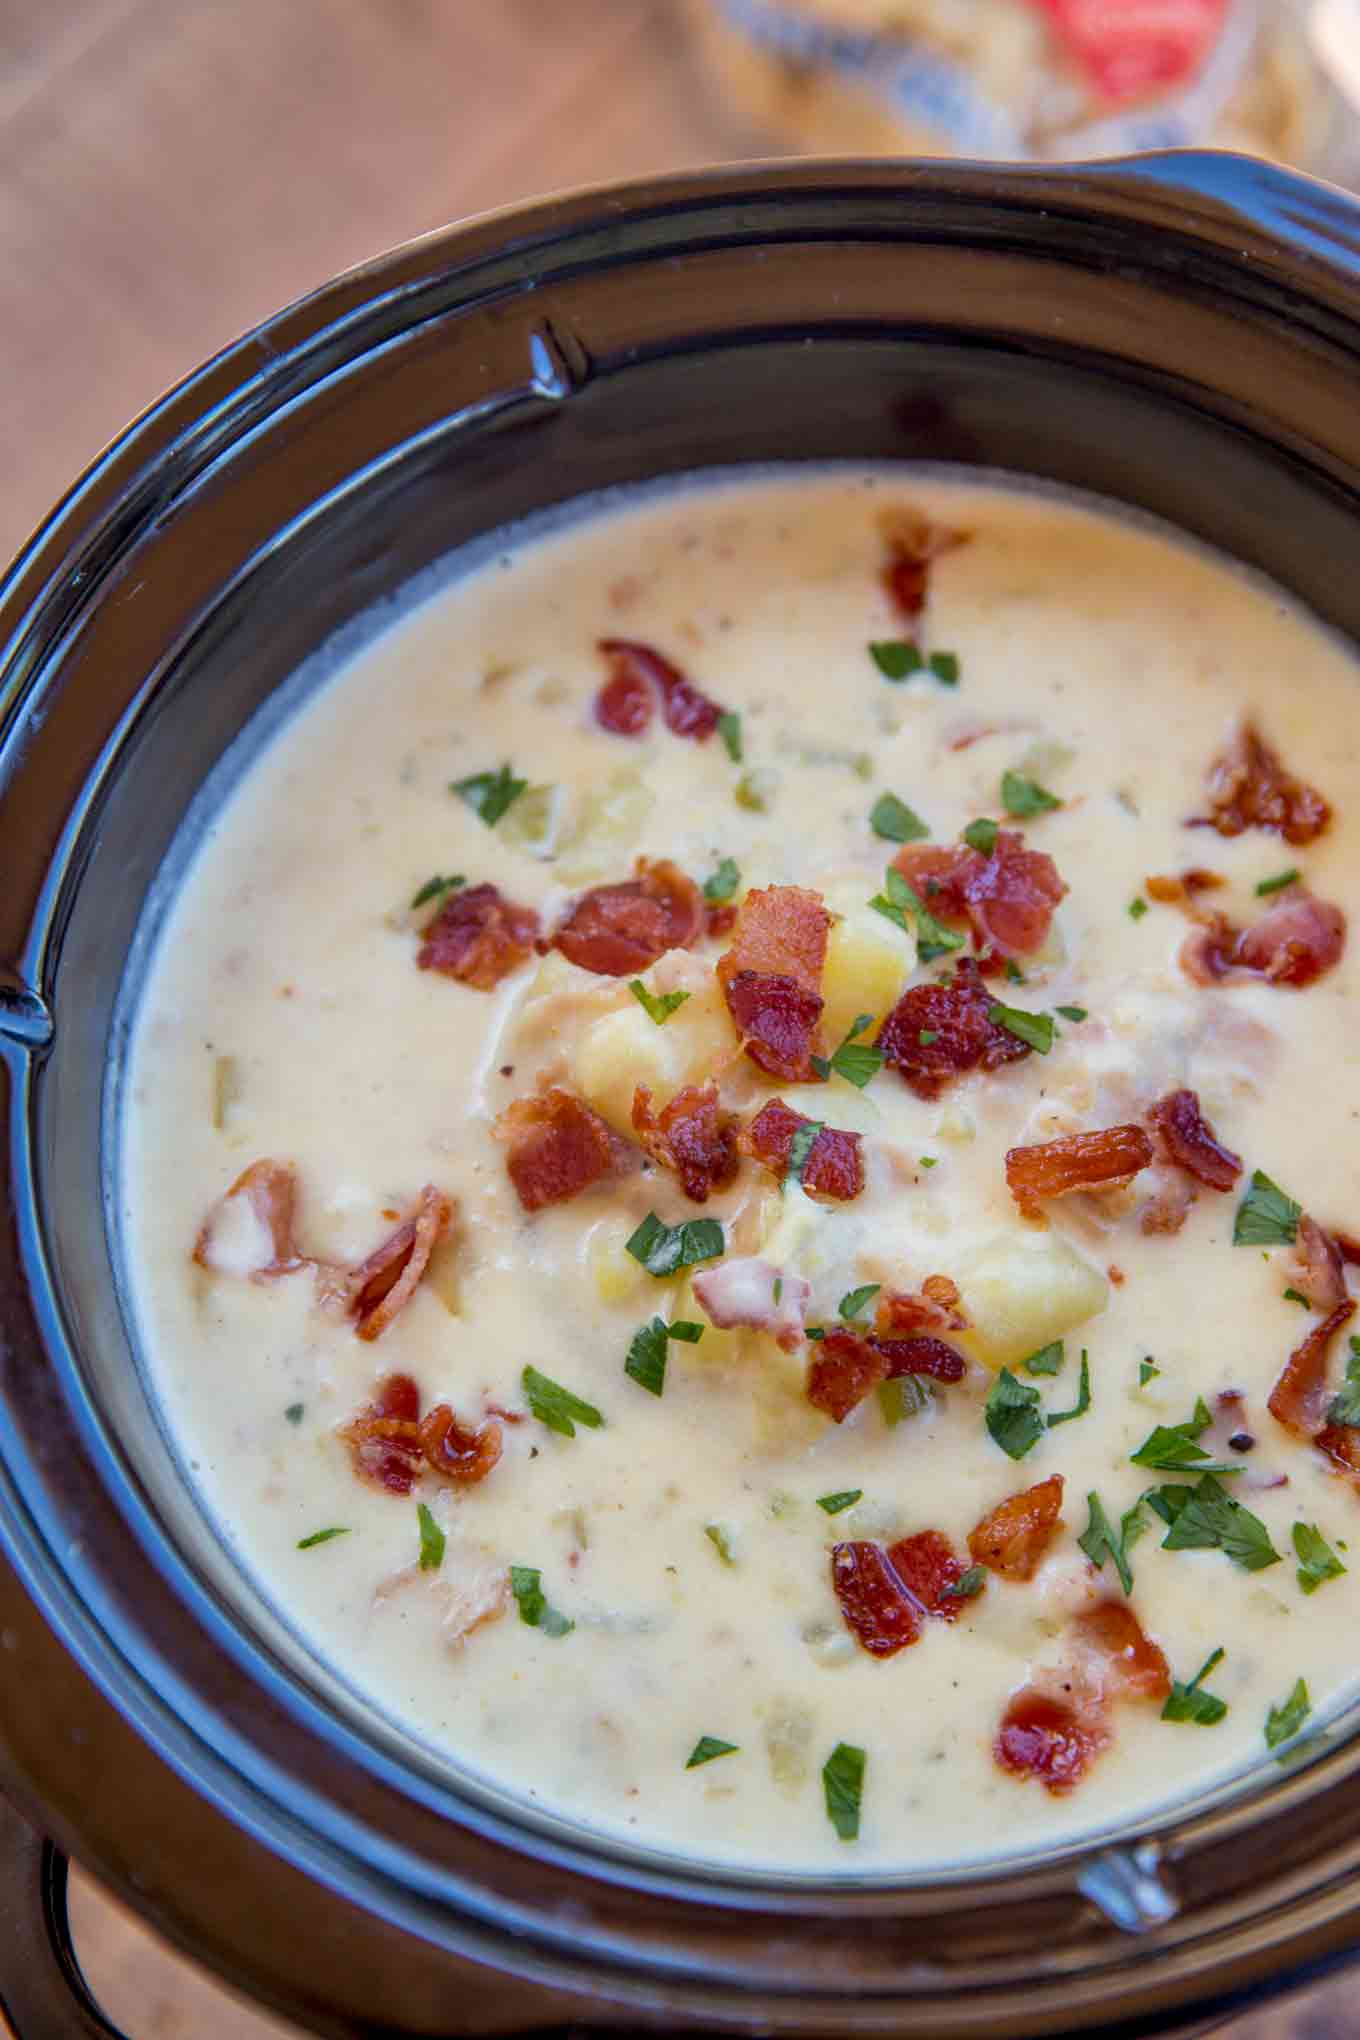 Slow Cooker Clam Chowder is so easy to make with a deliciously creamy, briny flavor mixed with smoky crispy bits of bacon and rich buttery yukon potatoes.